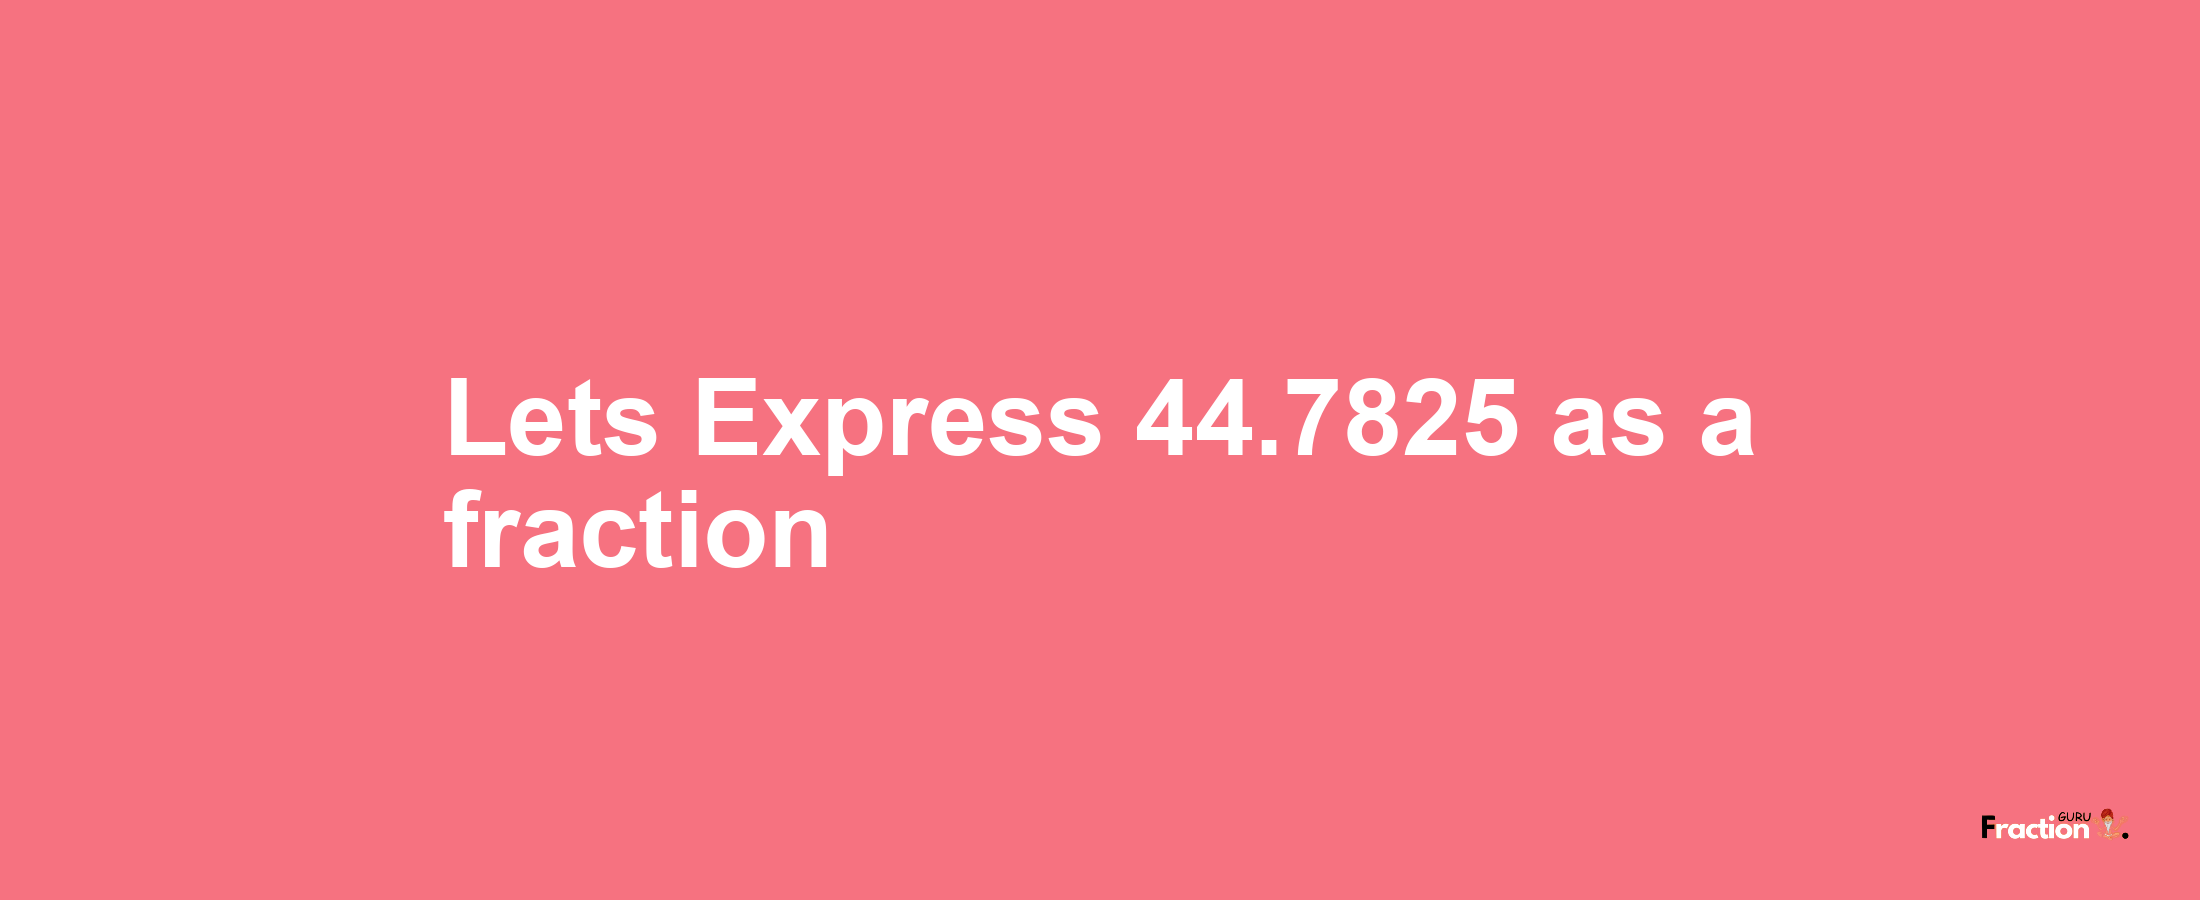 Lets Express 44.7825 as afraction